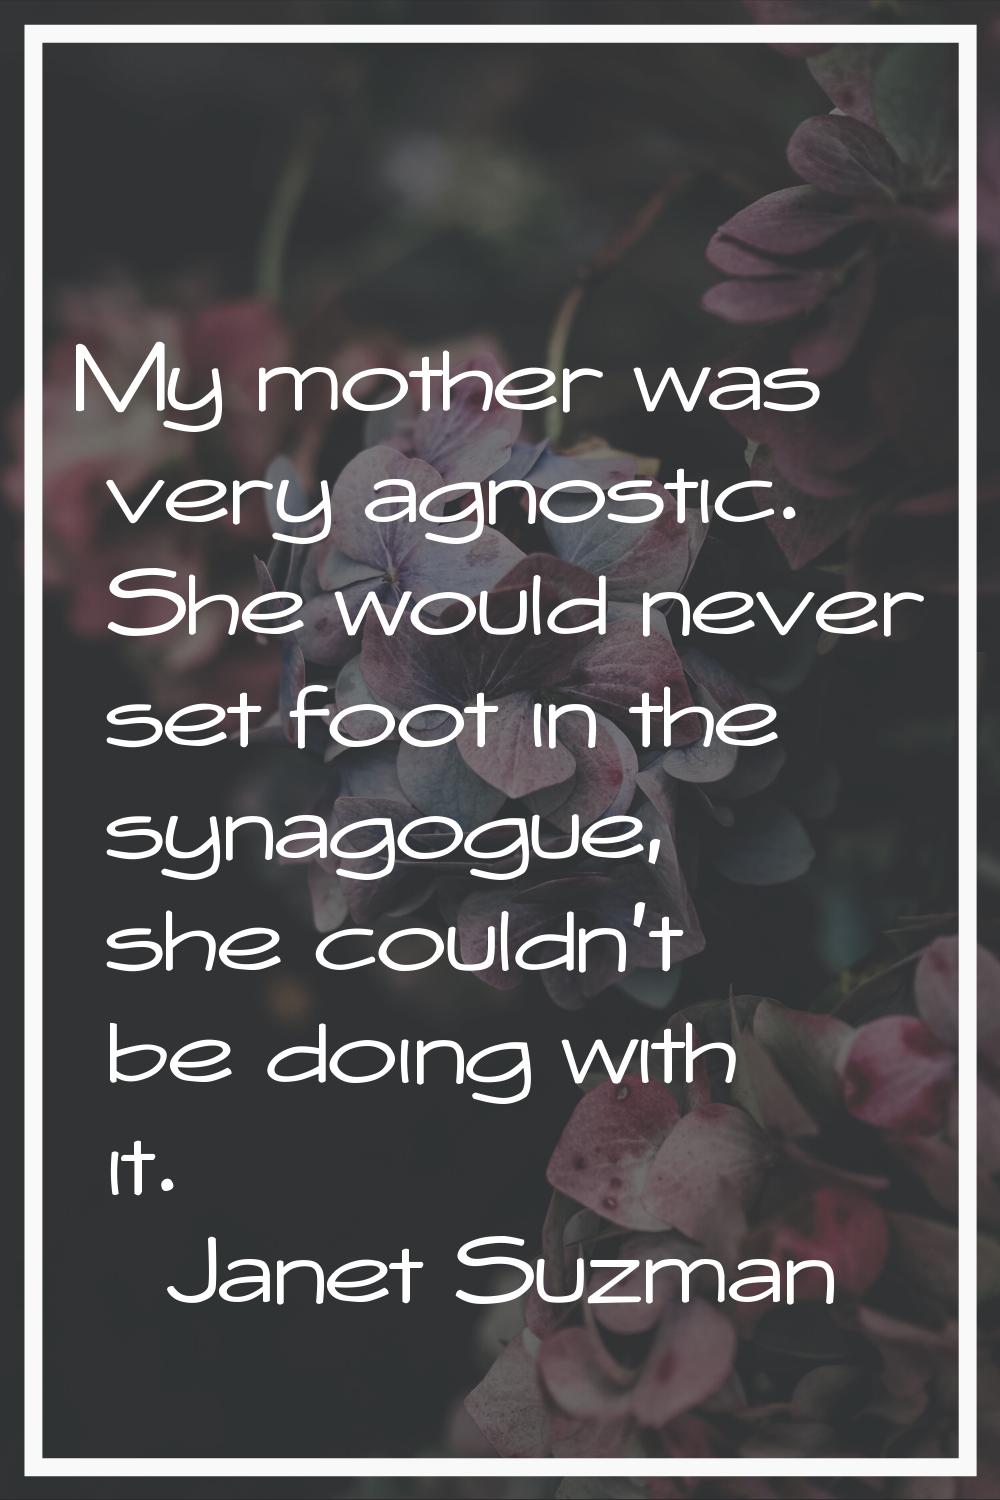 My mother was very agnostic. She would never set foot in the synagogue, she couldn't be doing with 